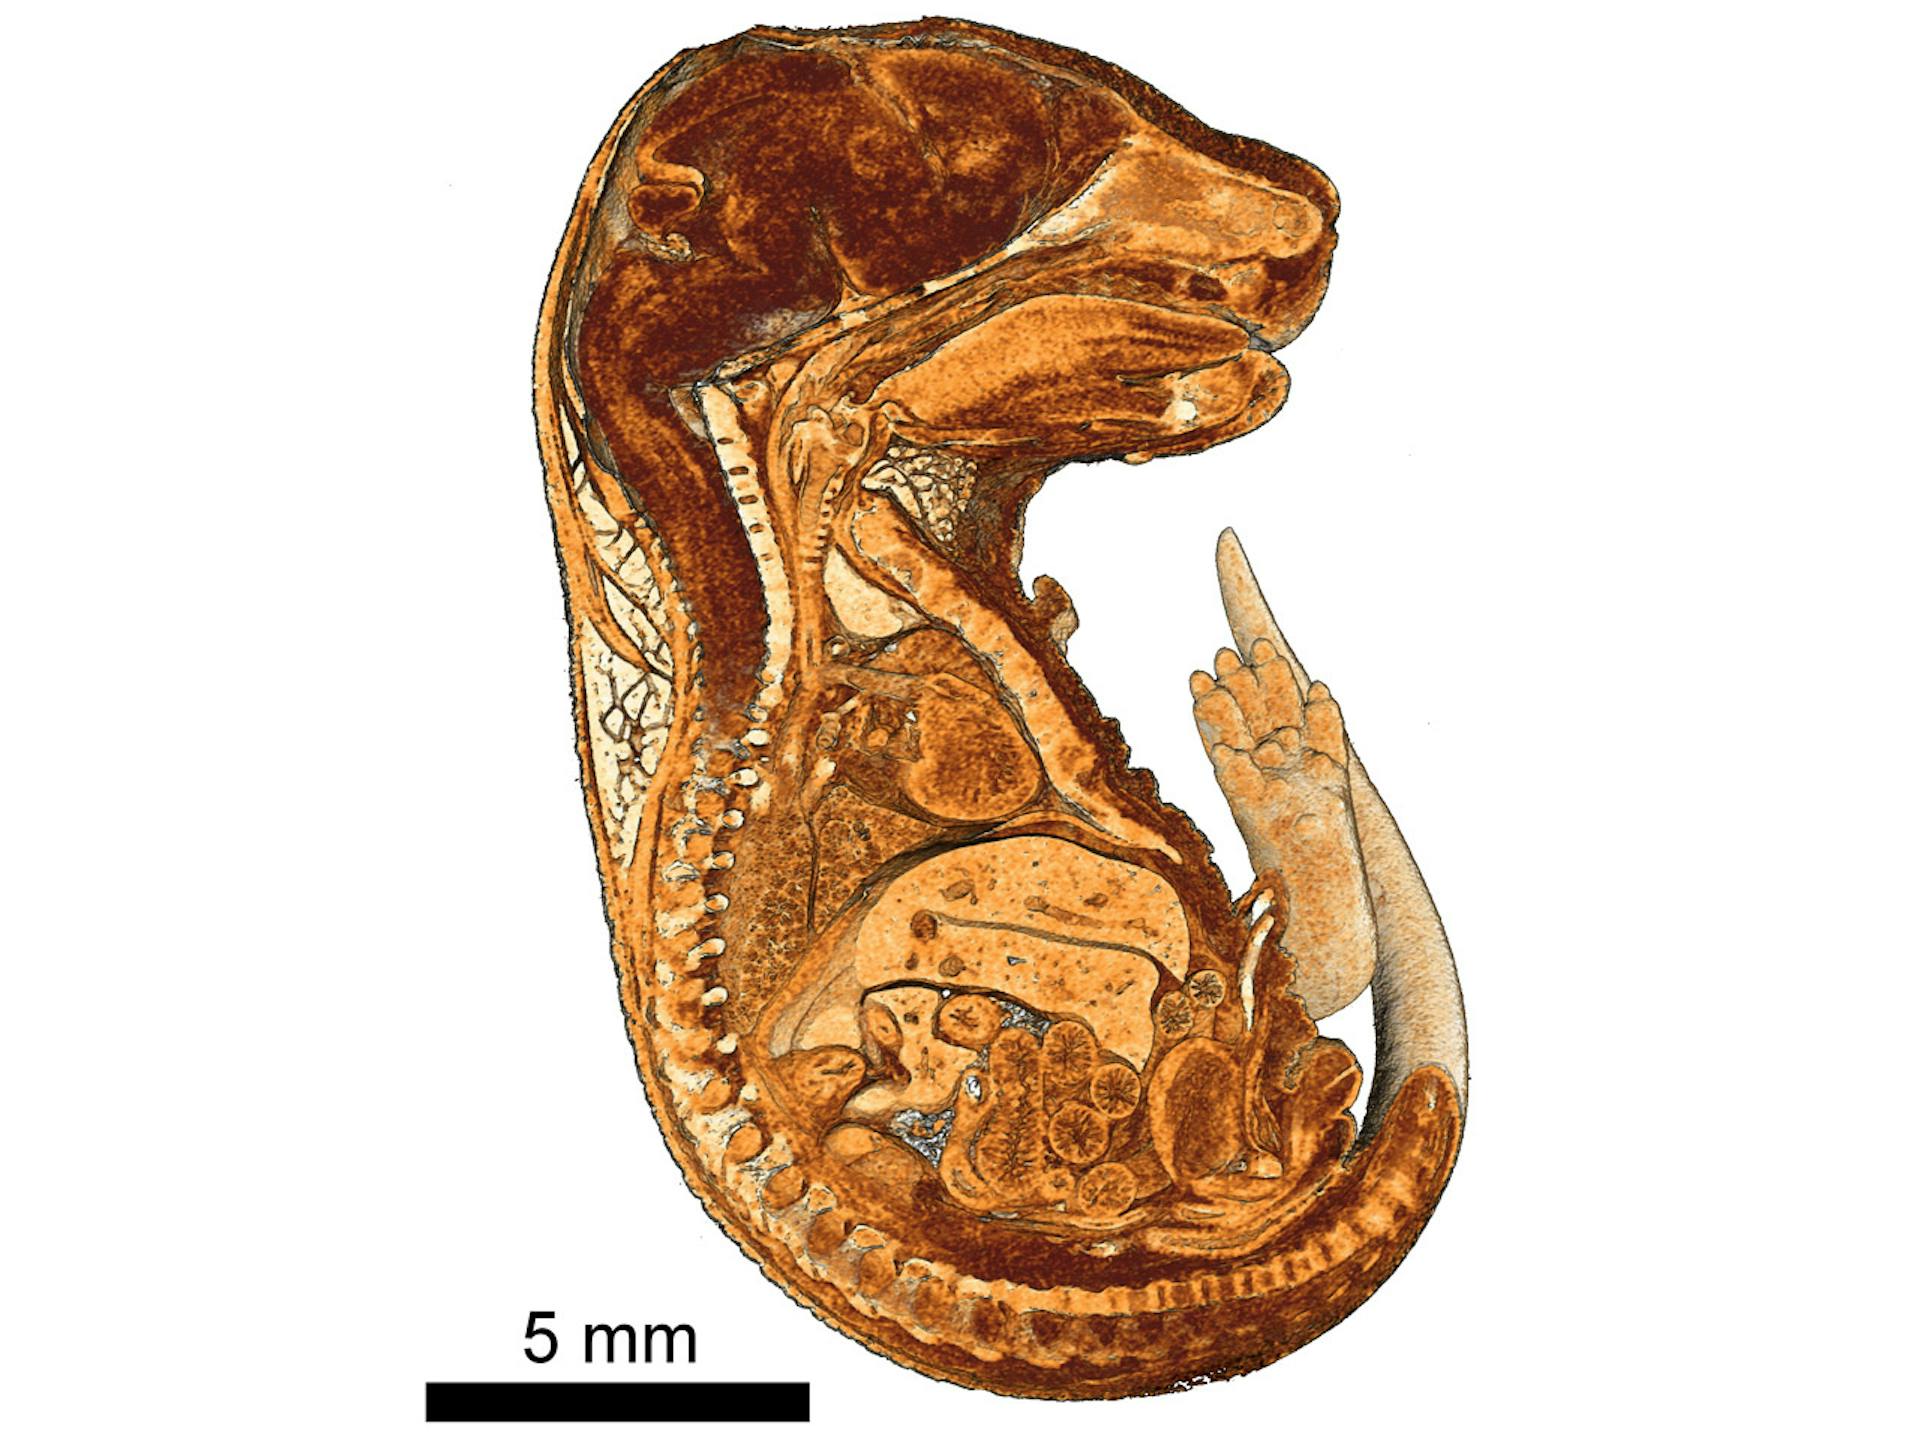 Cutaway view of 3D rendering of a mouse embryo embedded in paraffin.